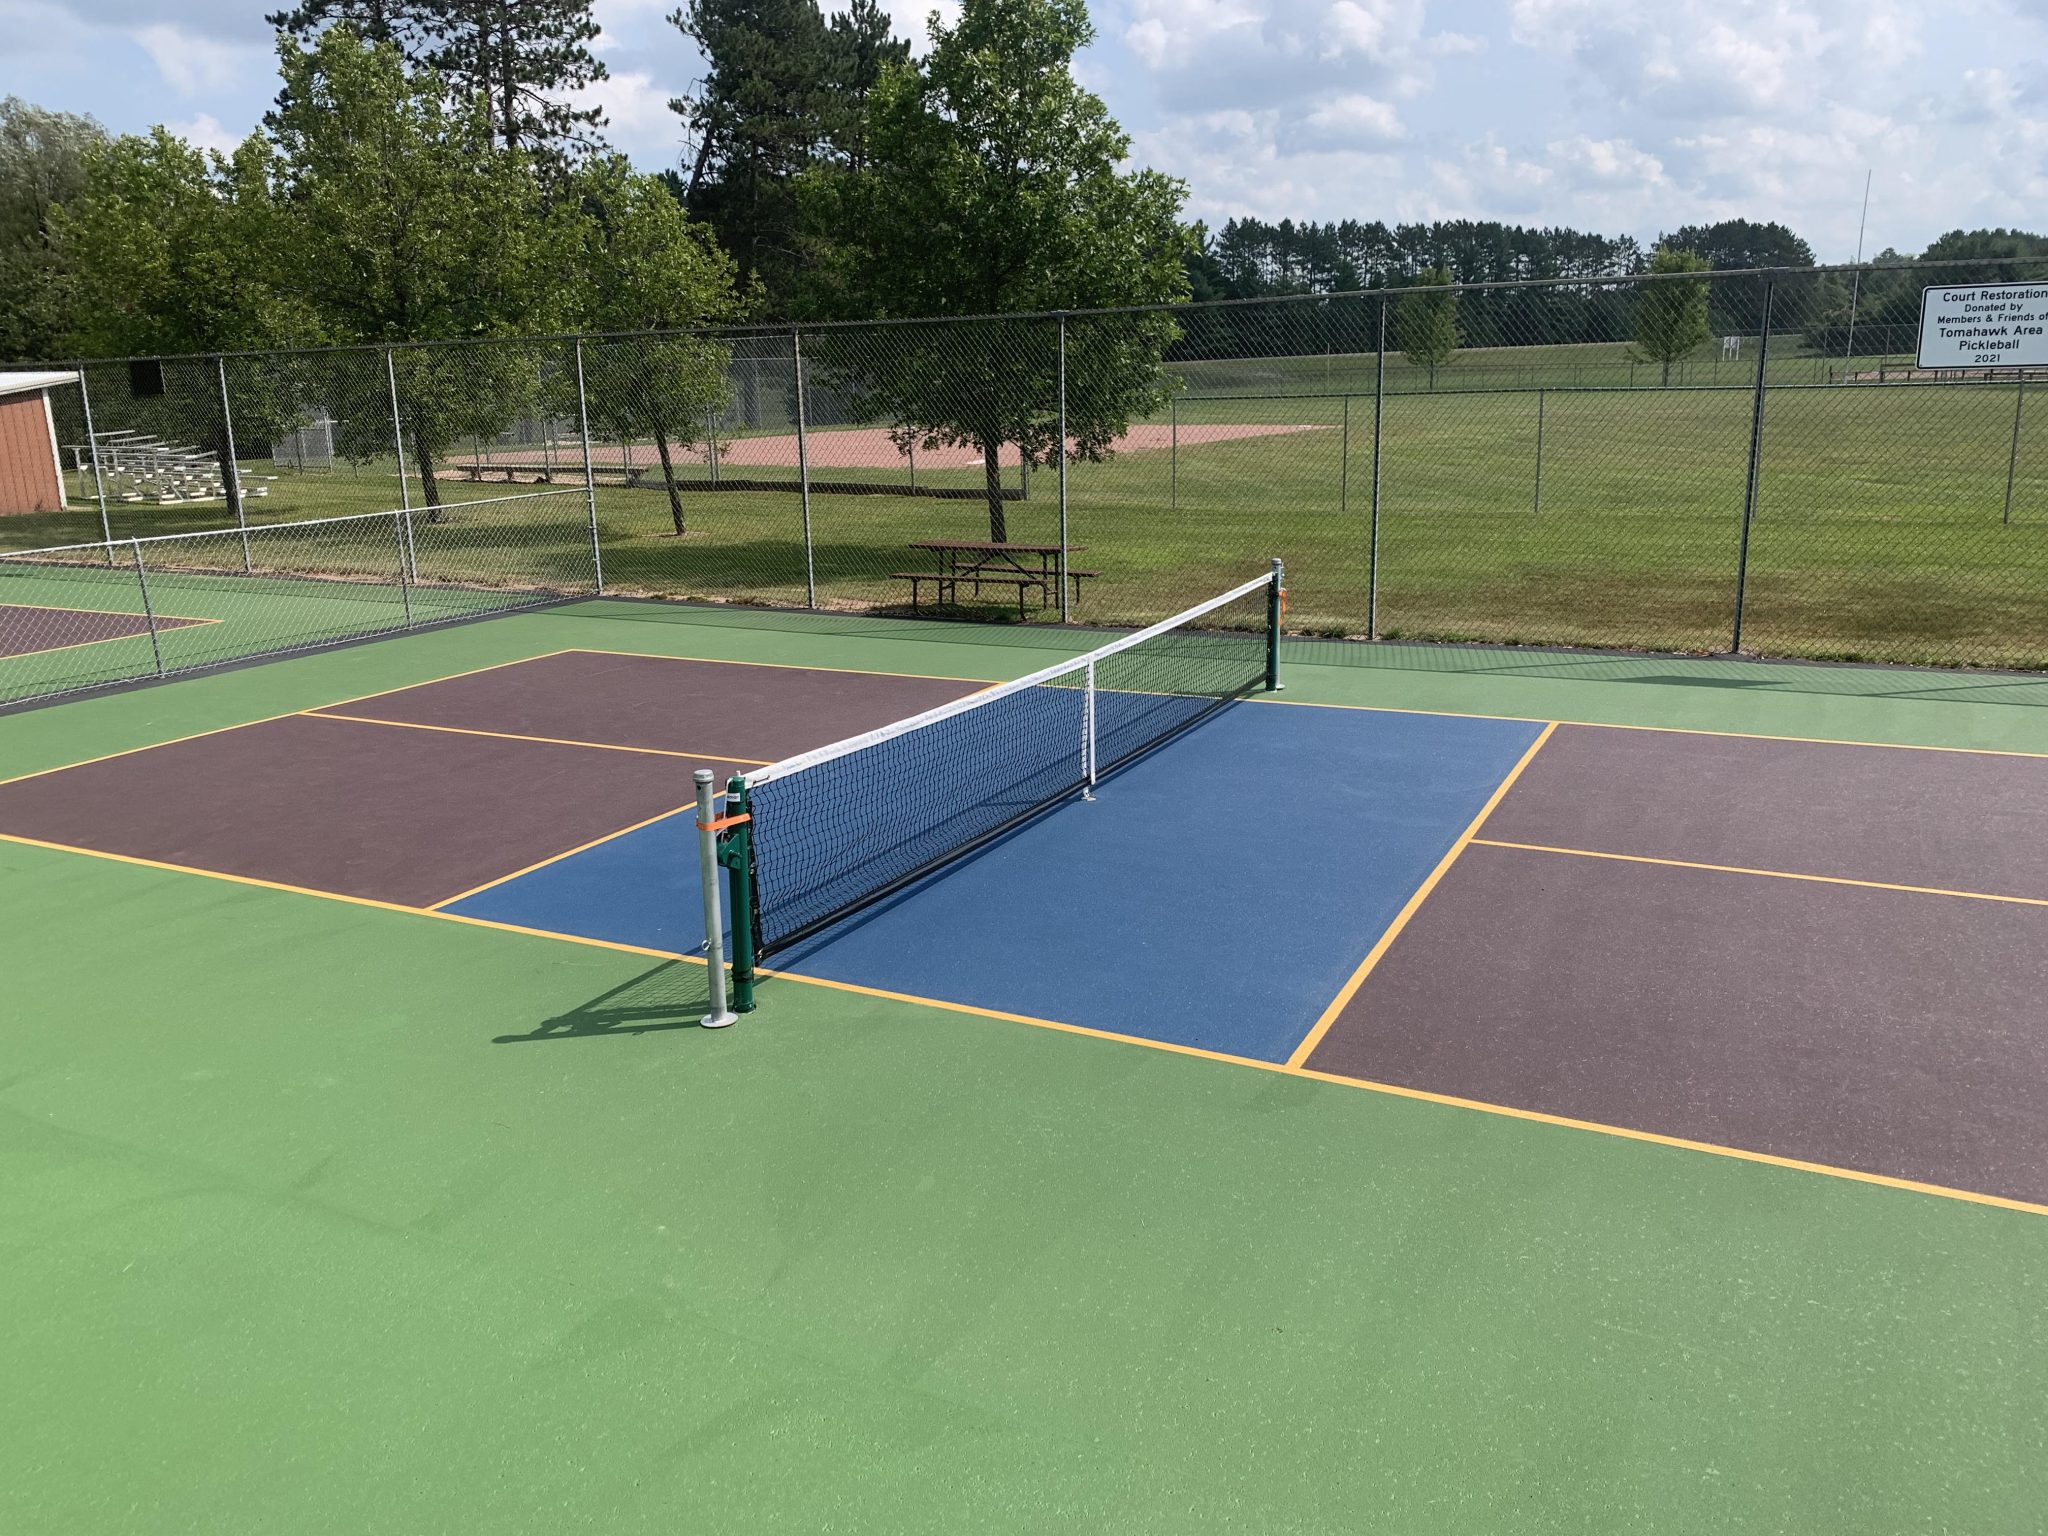 Tomahawk community comes together to build new pickleball courts at Kahle Park